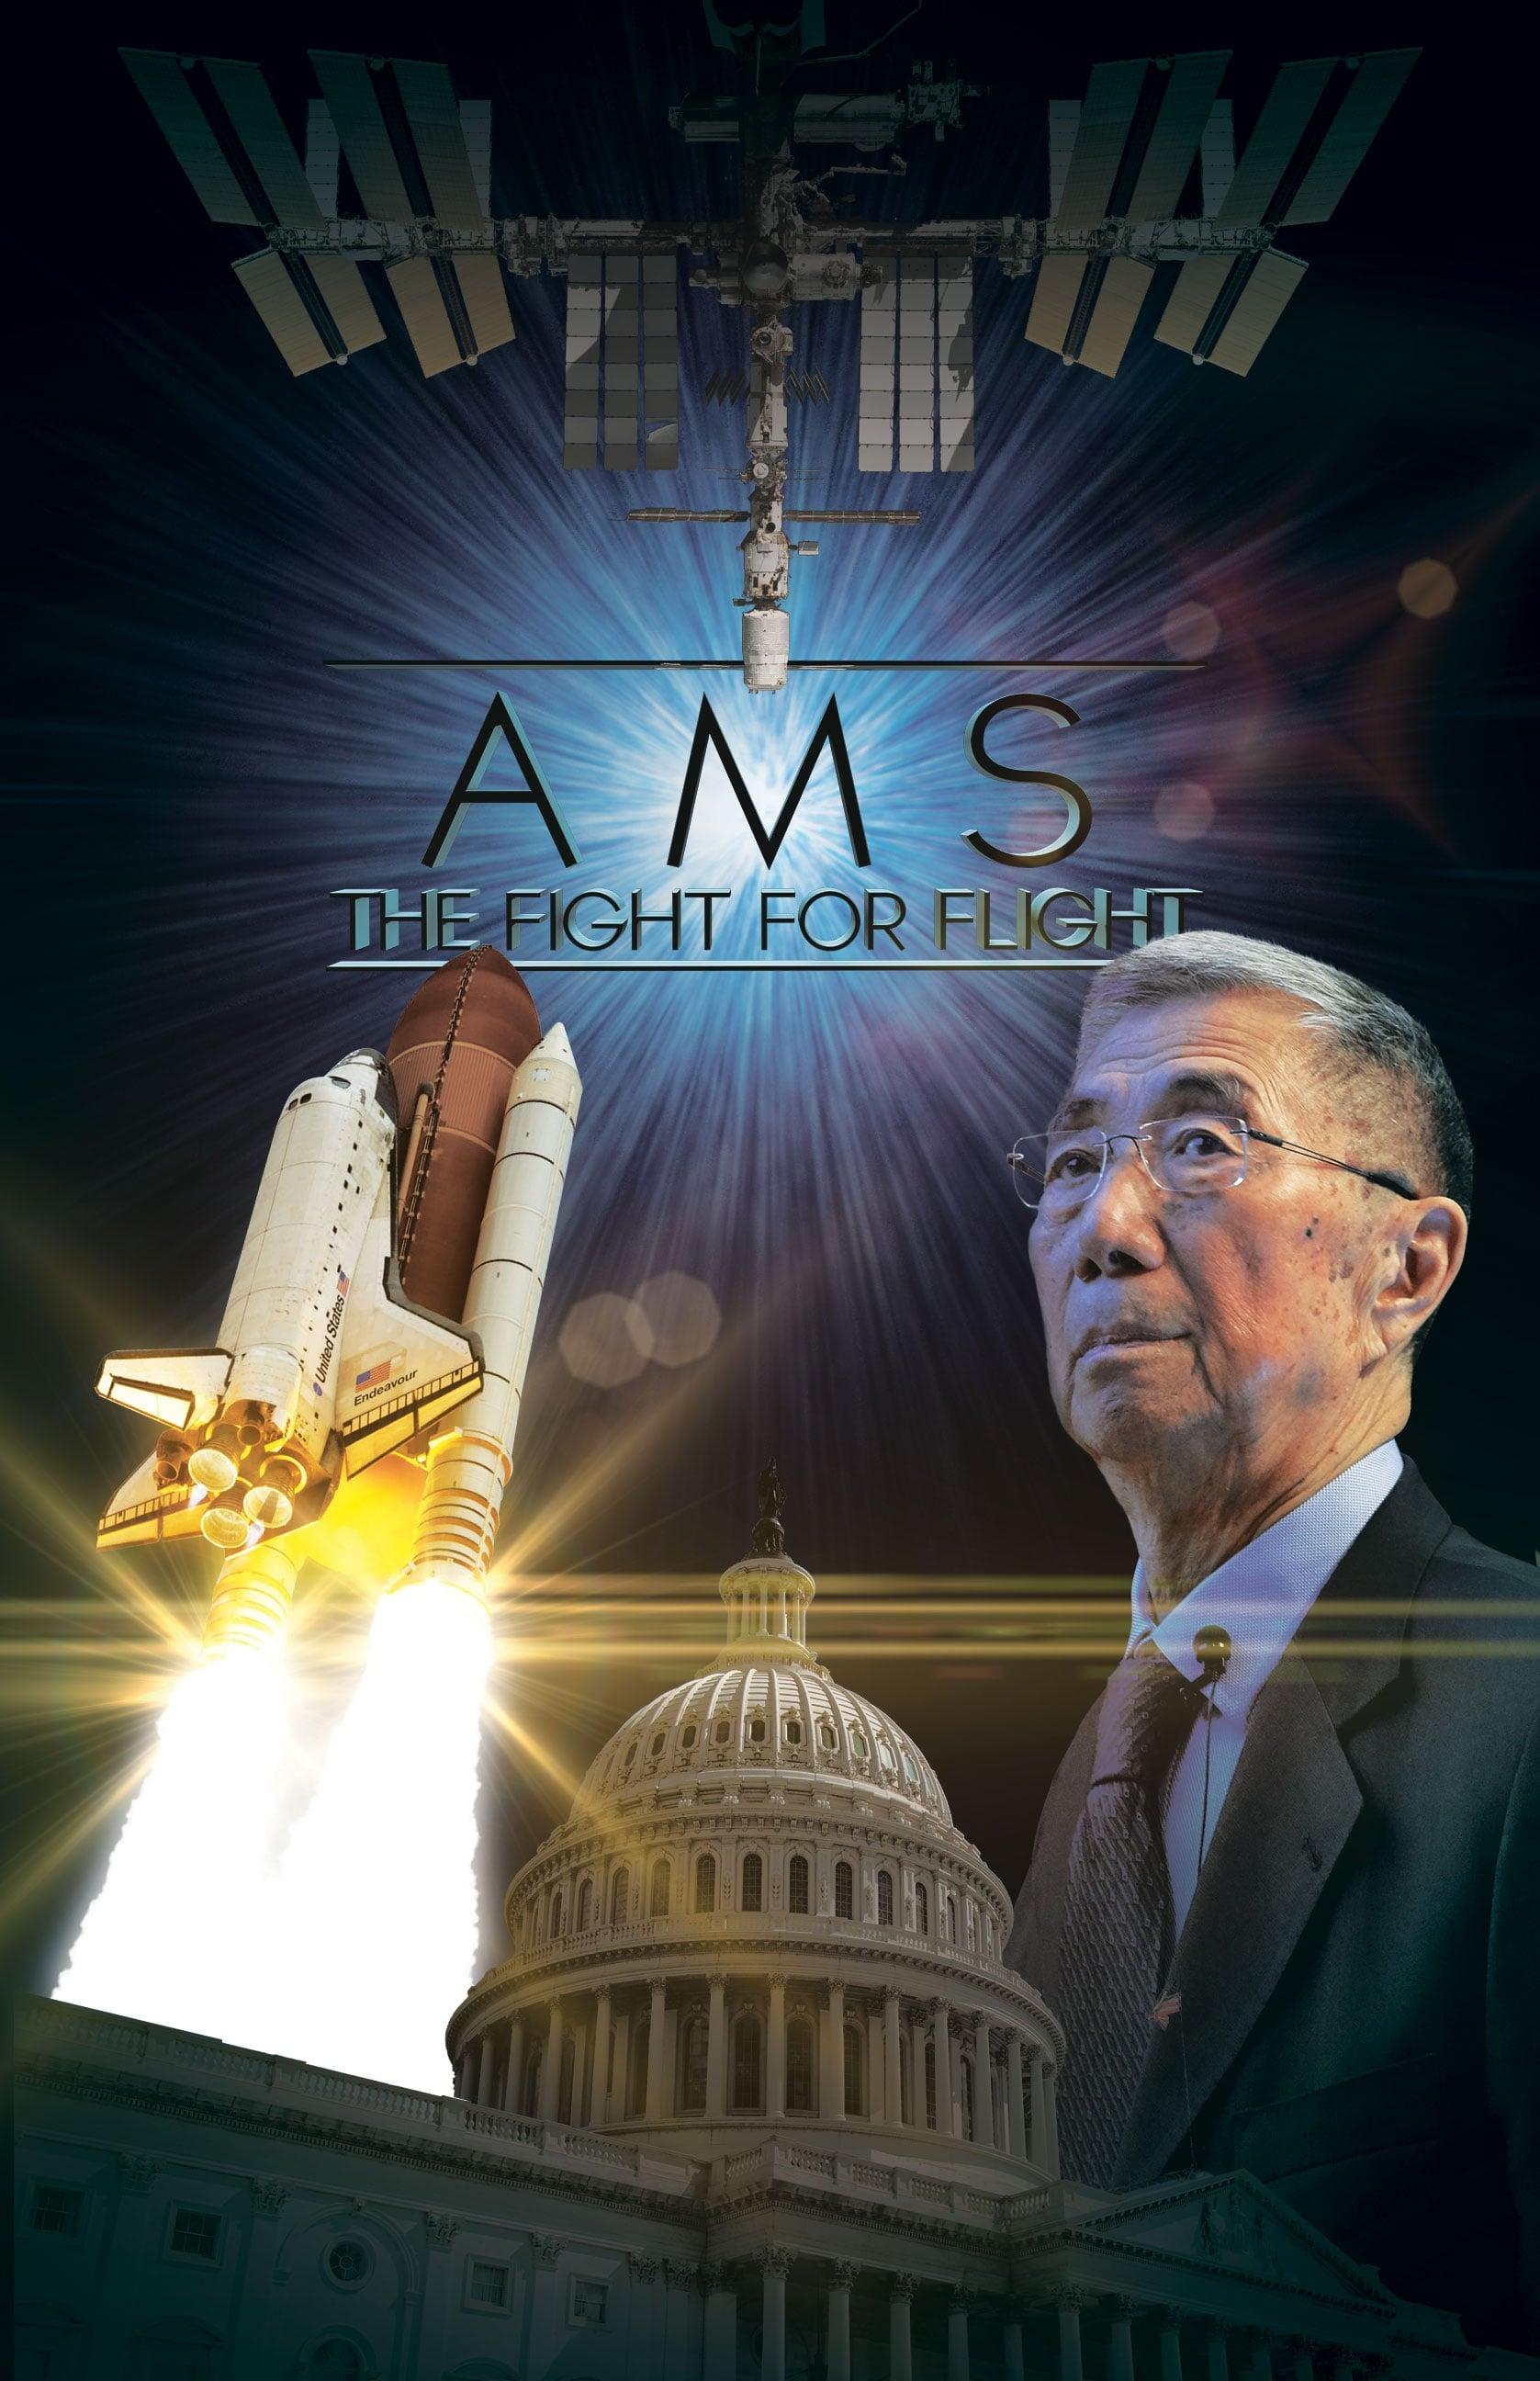 NASA Presents: AMS - The Fight for Flight poster